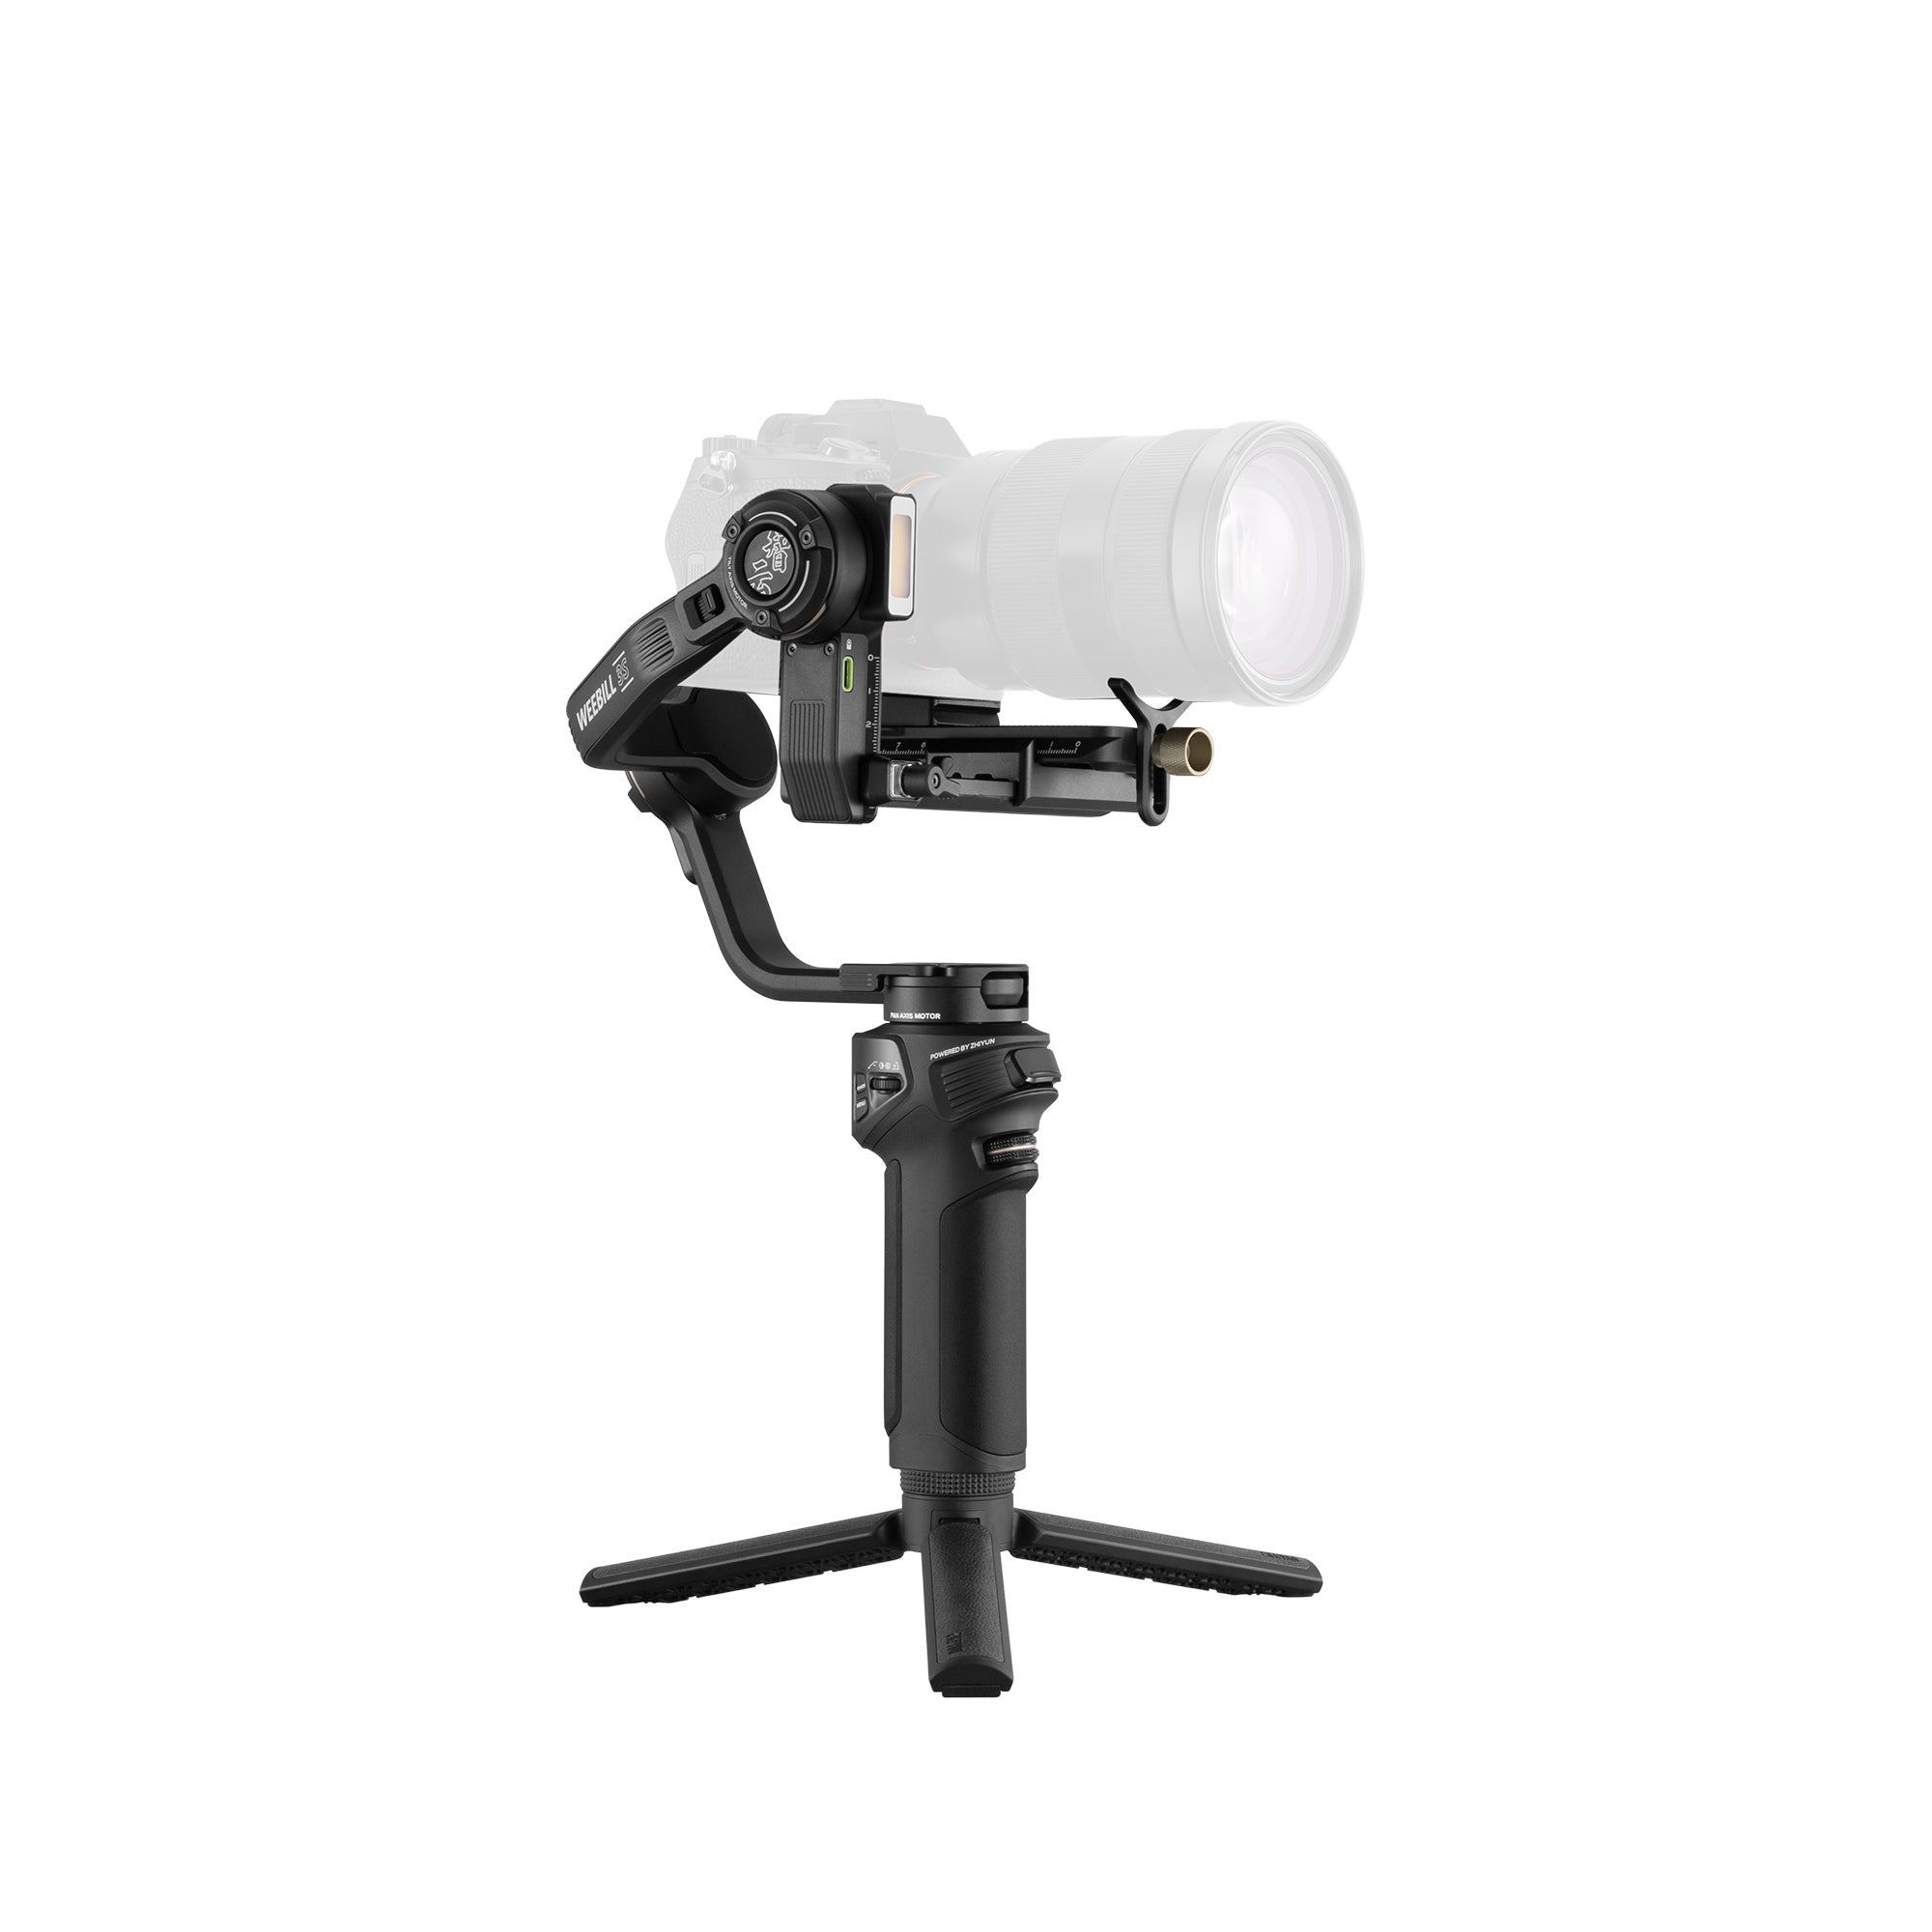 Weebill 3S - Gimbal Stabilizer for DSLR and Mirrorless Camera